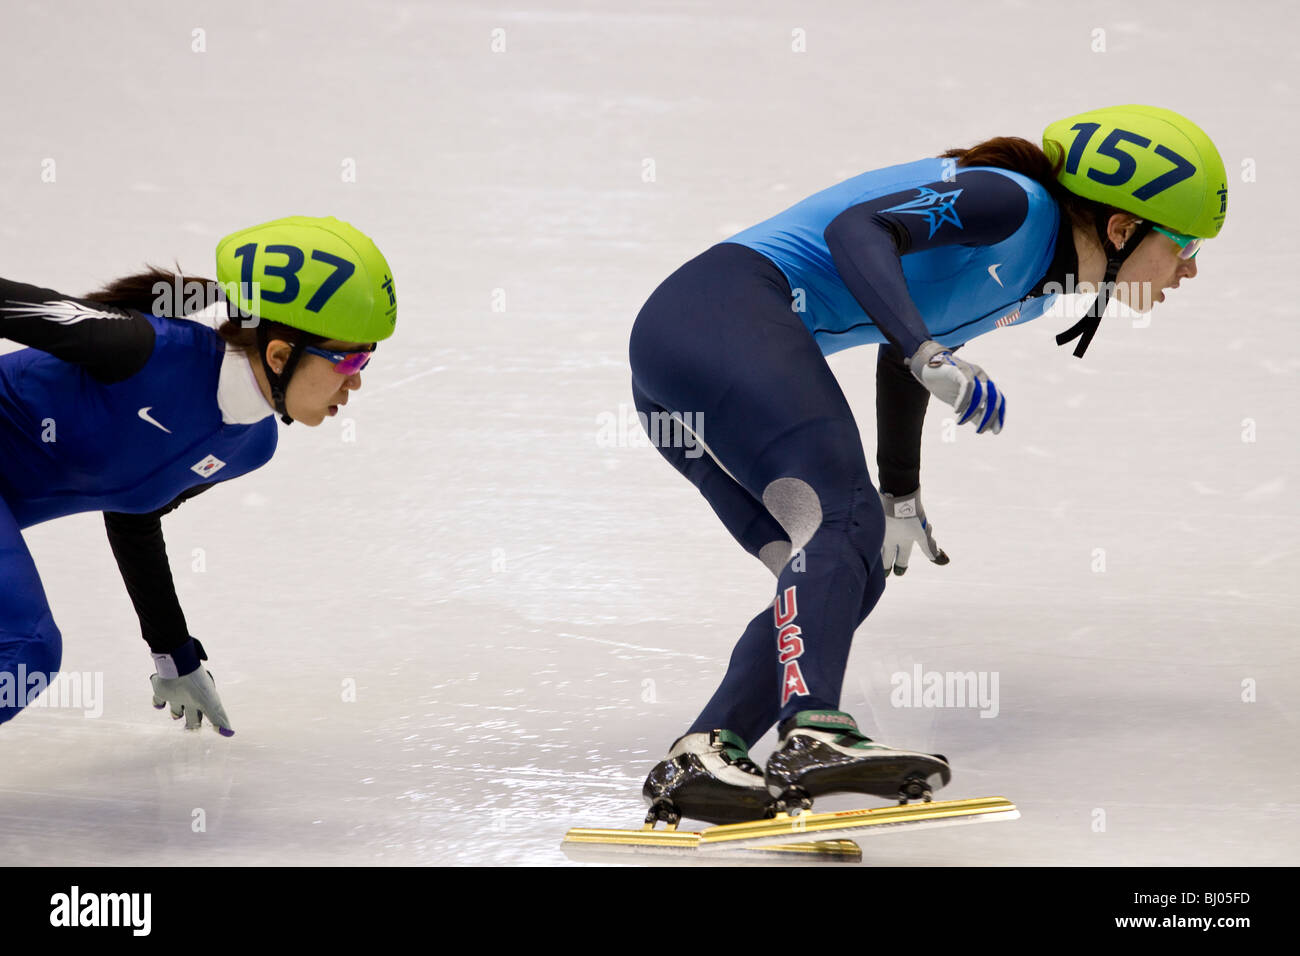 Katherine Reutter (USA) competing in the Short Track Speed Skating Women's 1000m event at the 2010 Olympic Winter Games Stock Photo